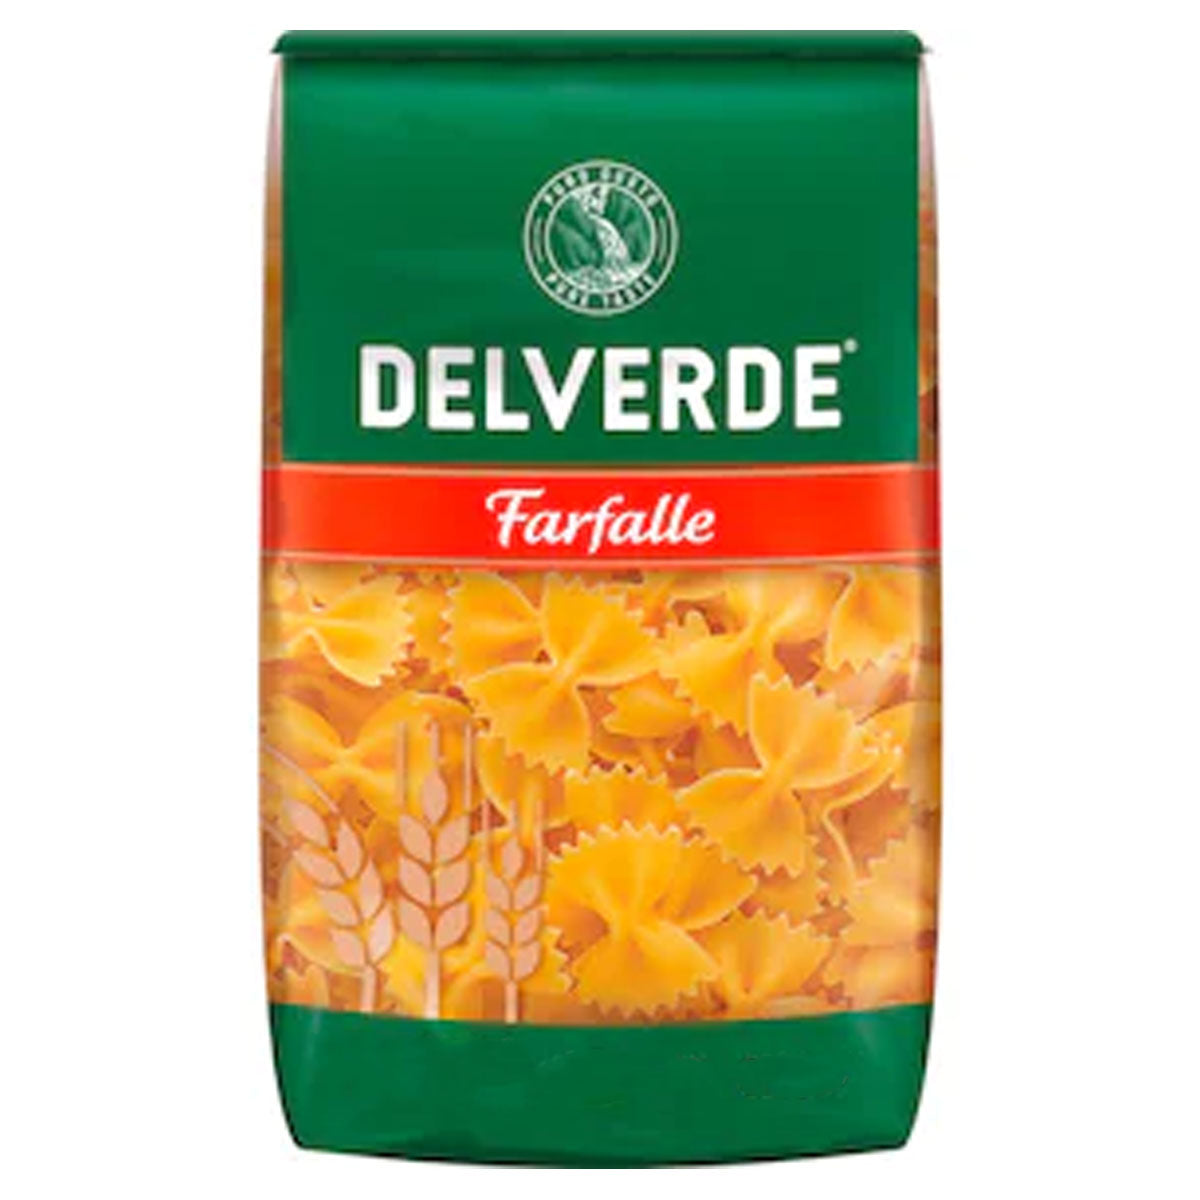 A bag of Delverde - Farfalle Pasta - 400g on a white background.